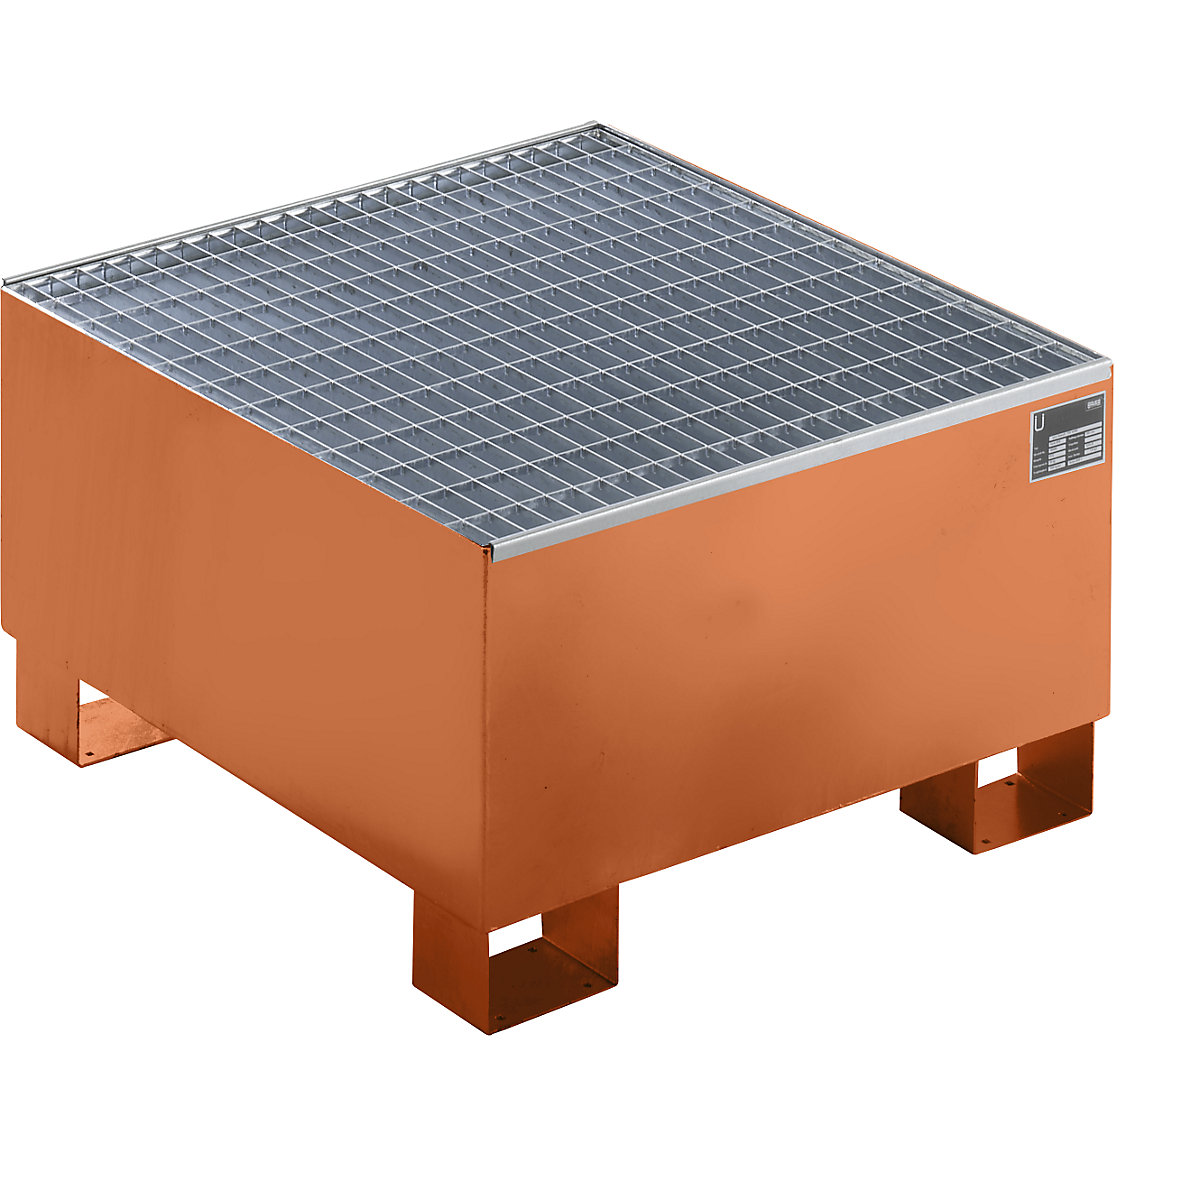 Sump tray made from sheet steel, LxWxH 800 x 800 x 465 mm, orange RAL 2000, with grate